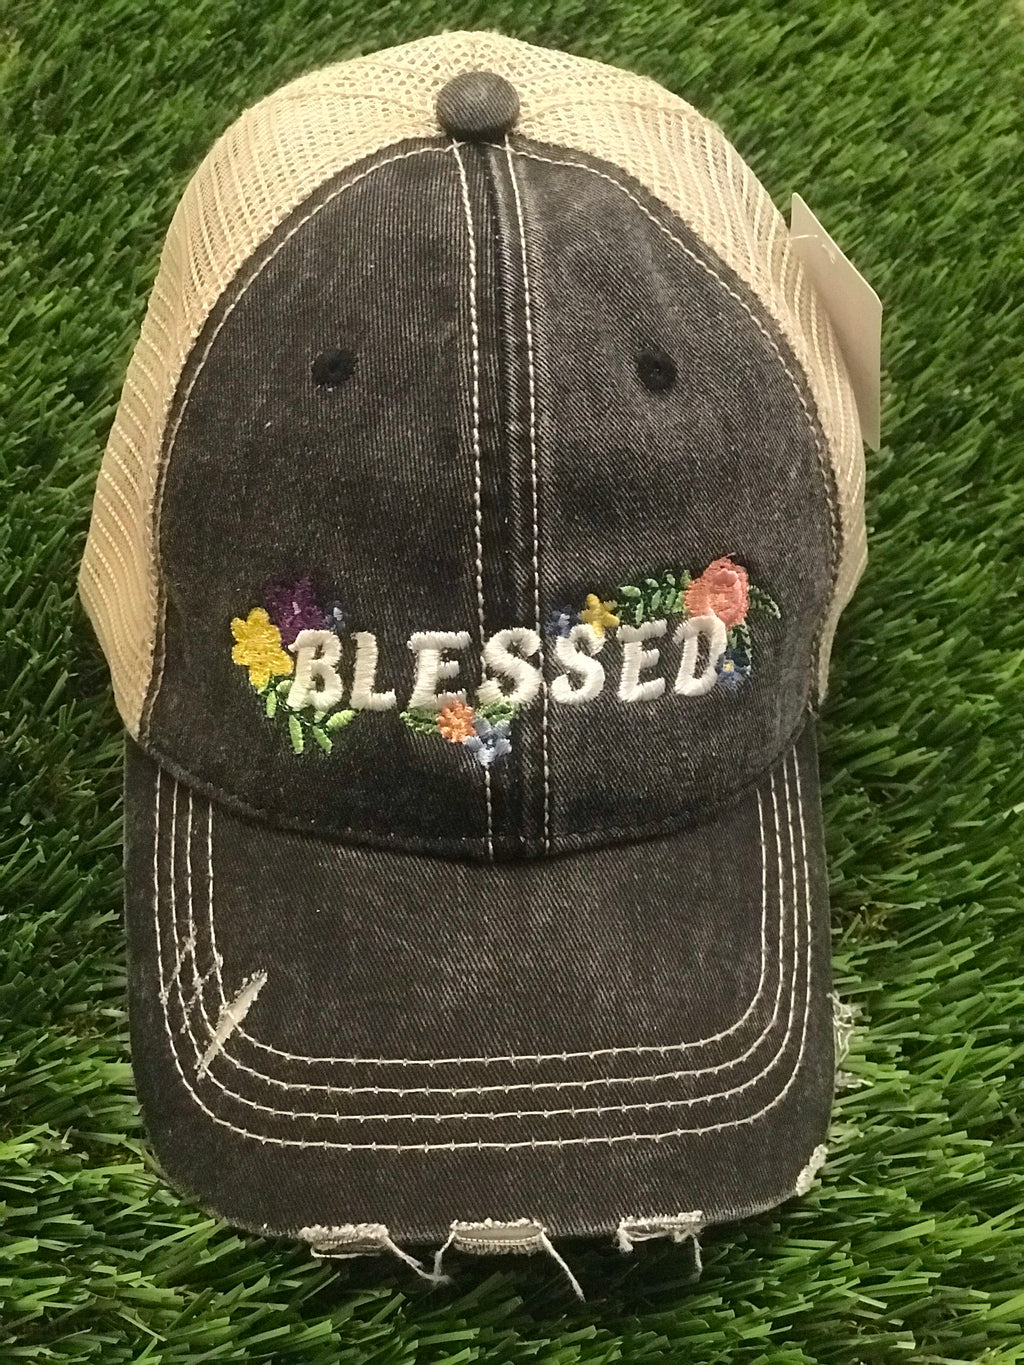 Blessed with Flowers Trucker Hat